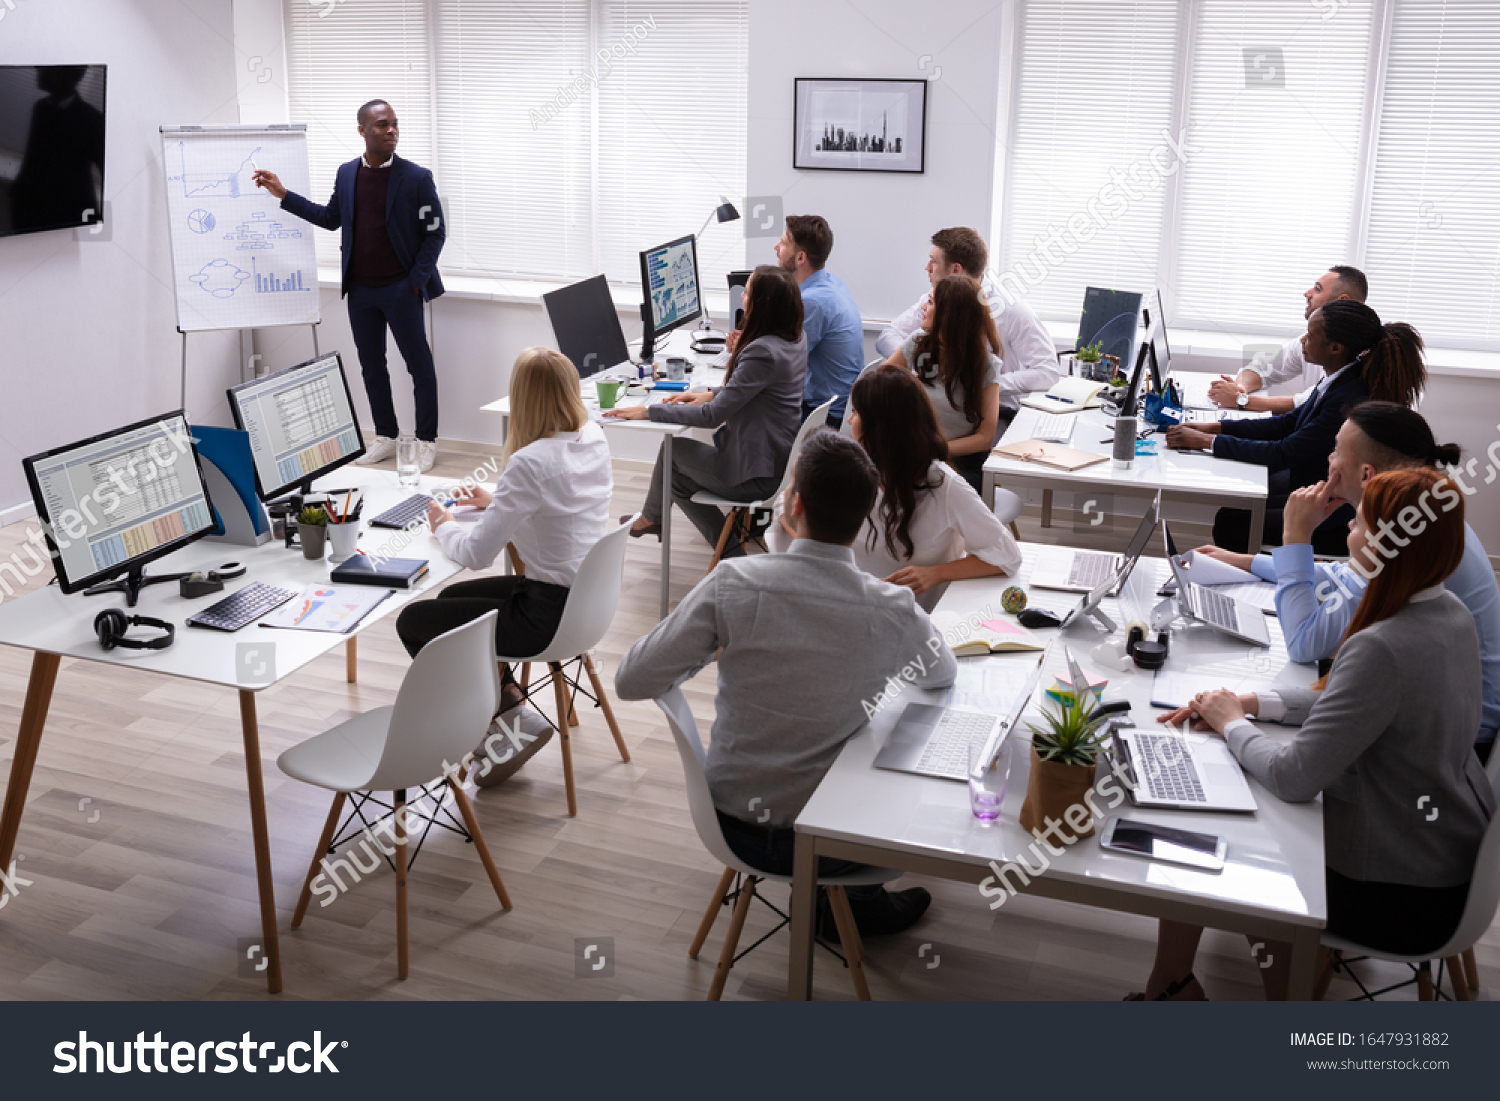 African Businessman Giving Presentation To His Colleagues Sitting On Table With Computers In Office #1647931882